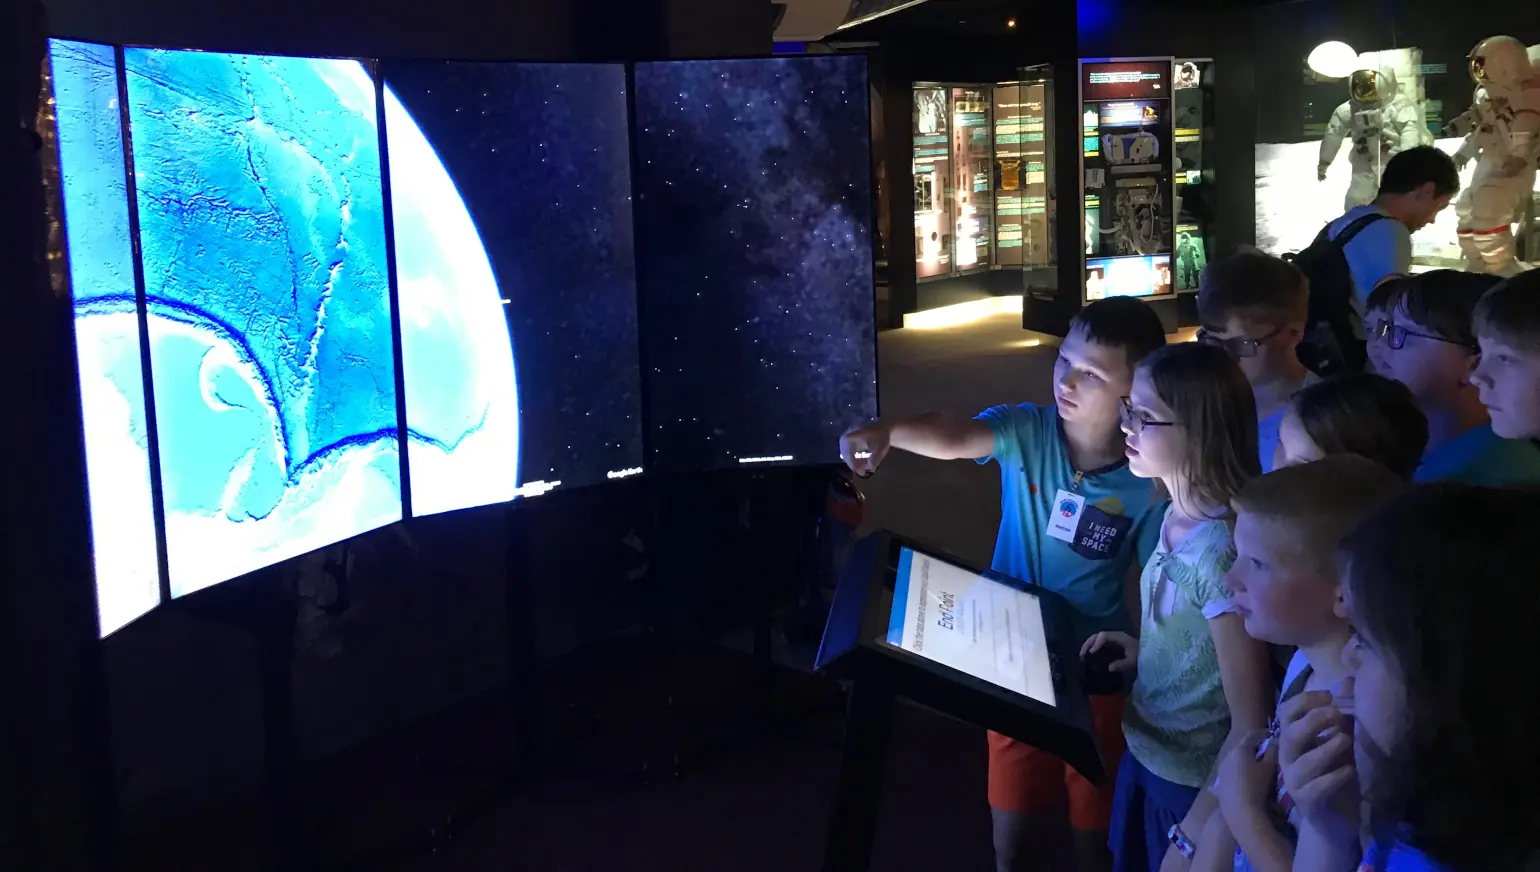 Several school kids gather around a VisionPort installation in a space museum, with spacesuits visible in the background. A boy points at an image of a planet displayed on the seven screens arranged in a semicircle.